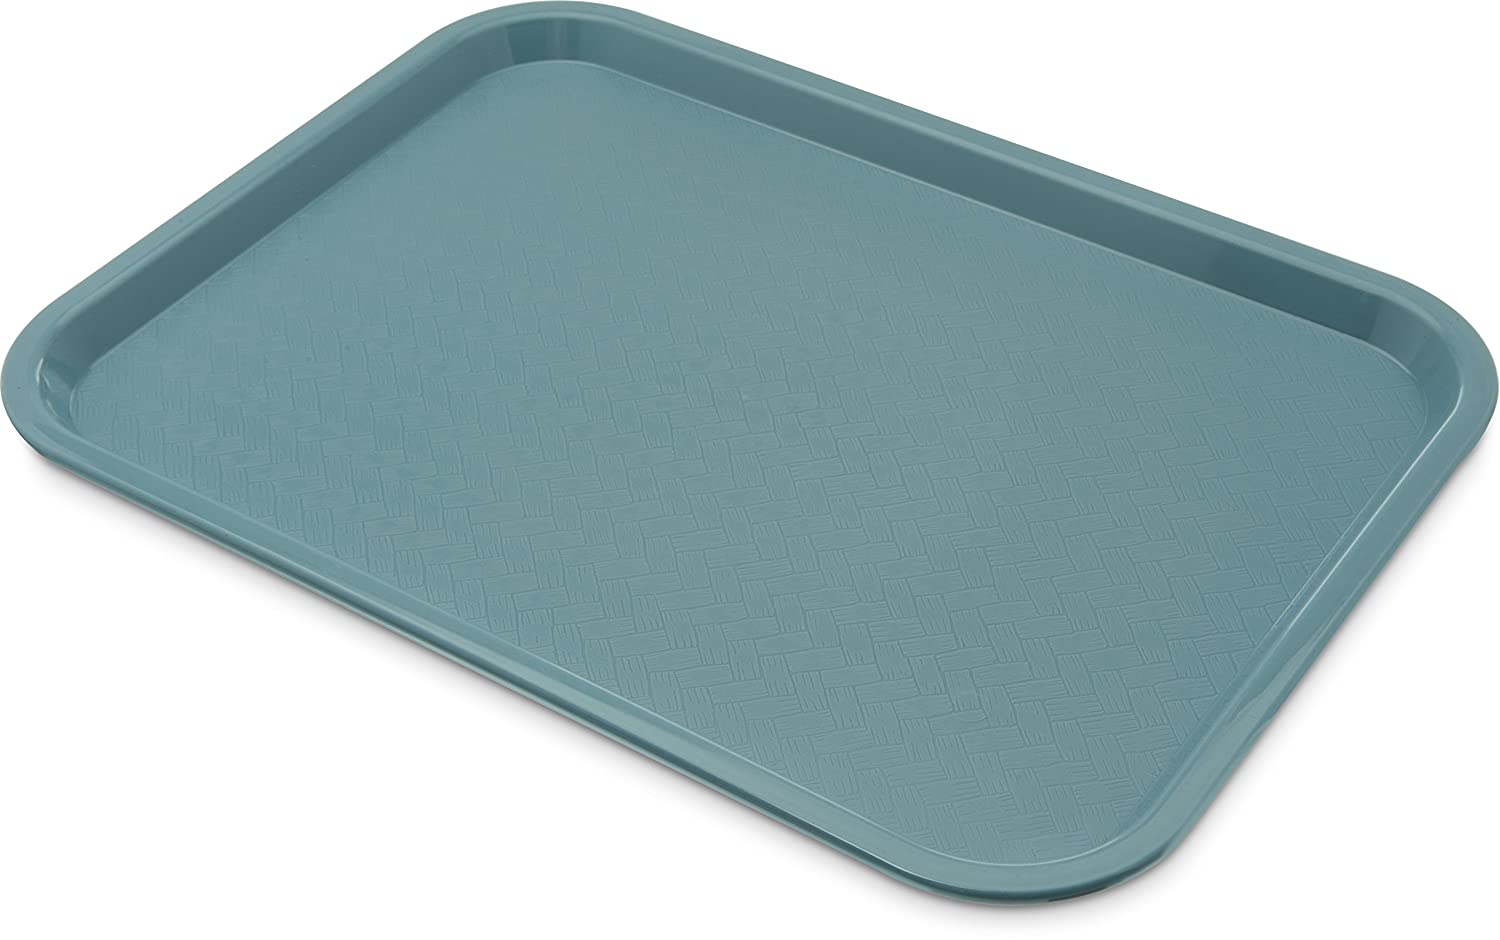 Cafeteria-style Serving Tray